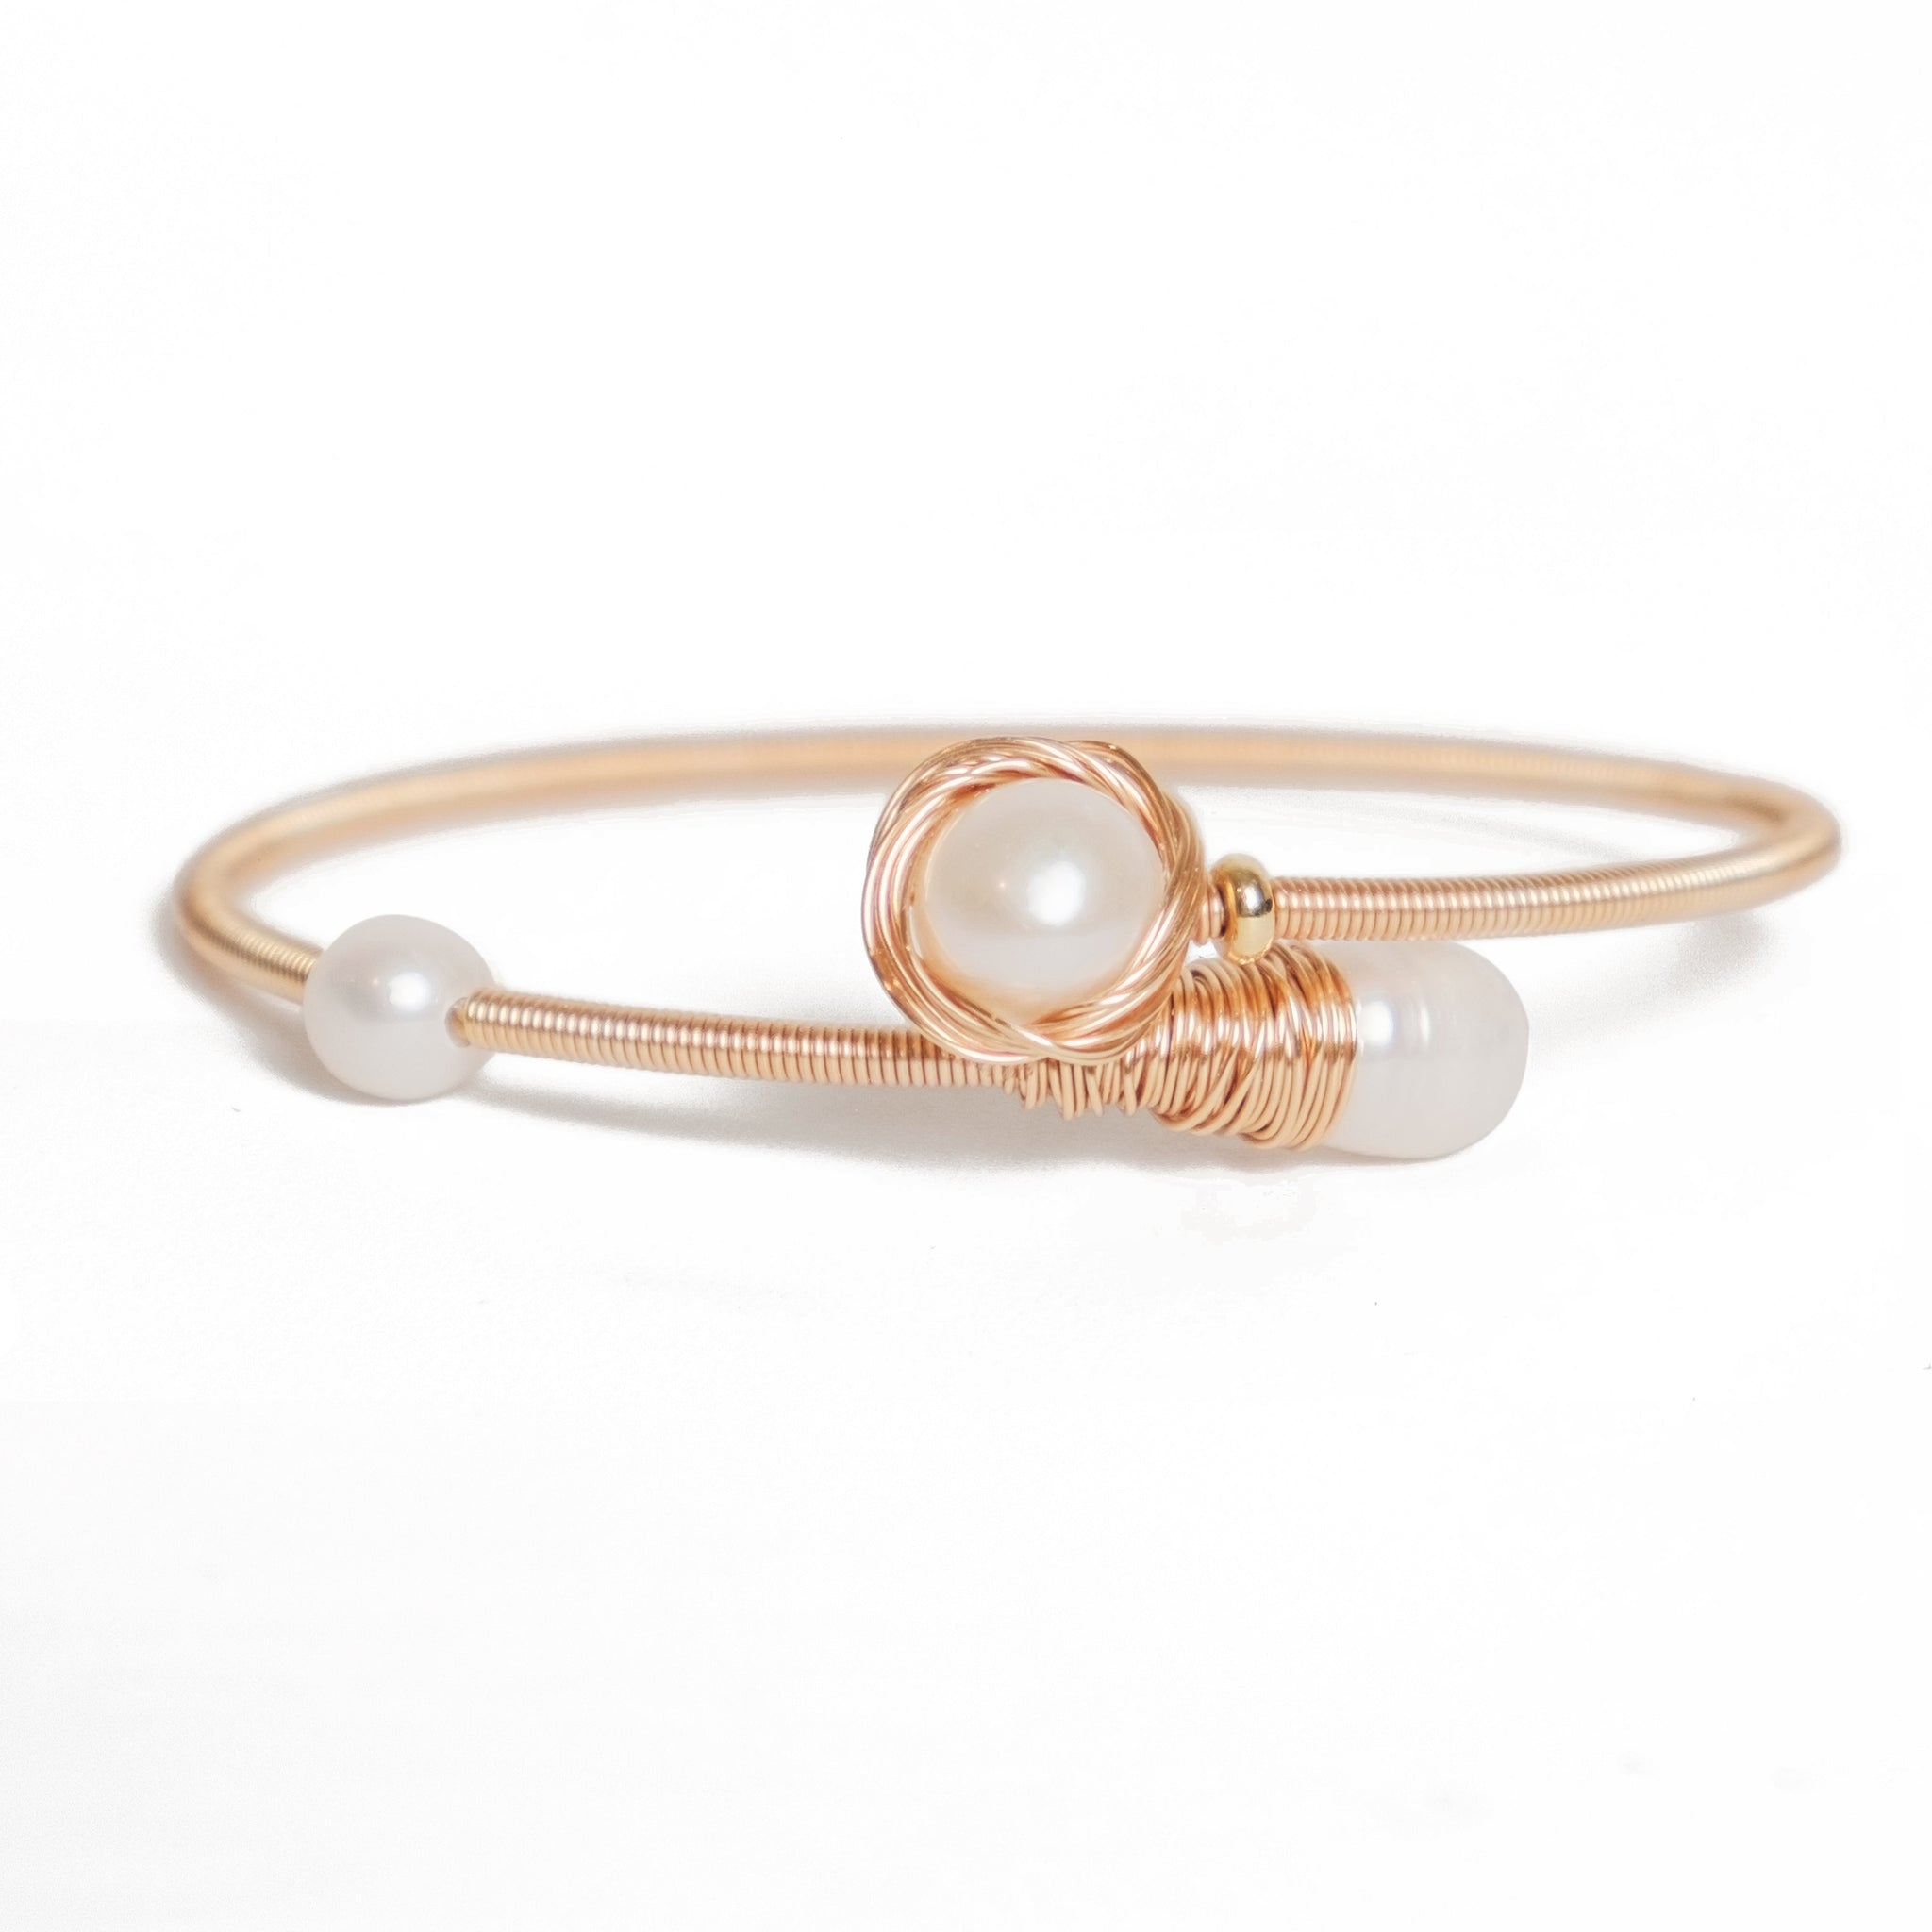 Chokore Freshwater Pearl Bangle Bracelet with Wire detailing